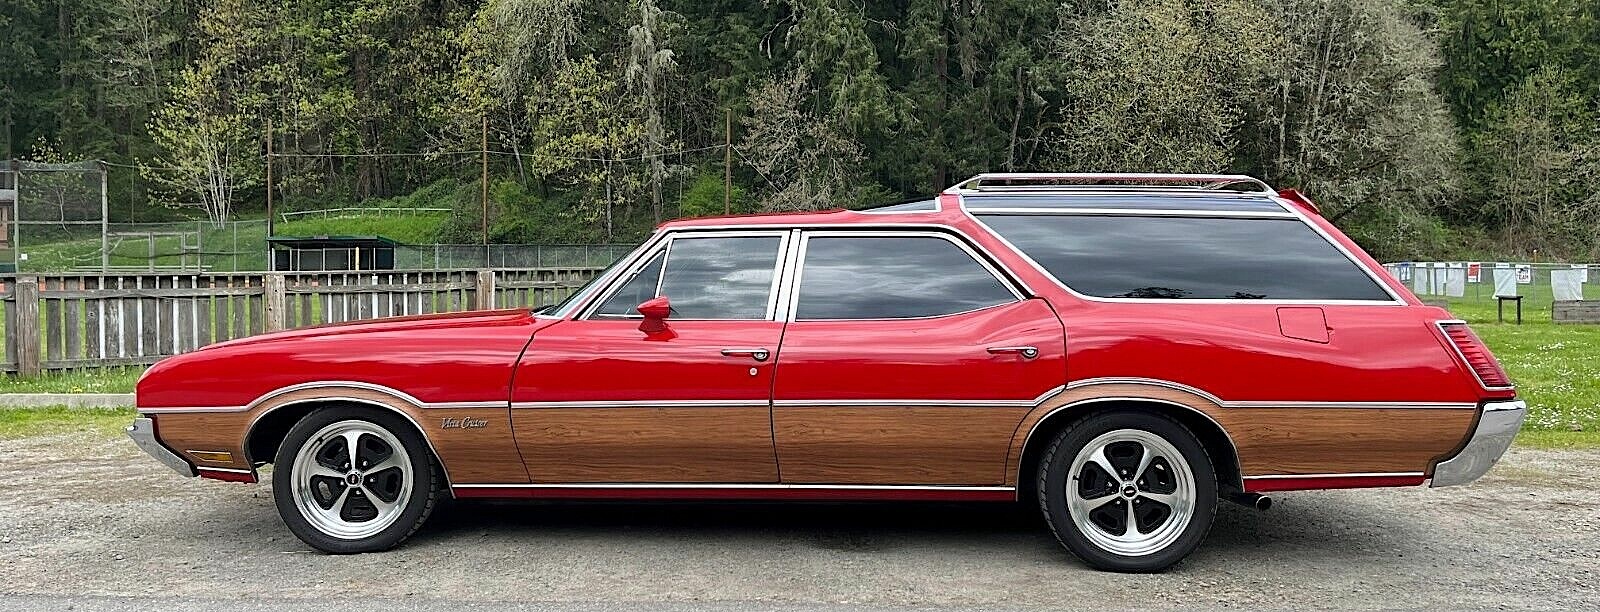 1972 Olds Vista Cruiser Is a Wagon With a View - eBay Motors ...